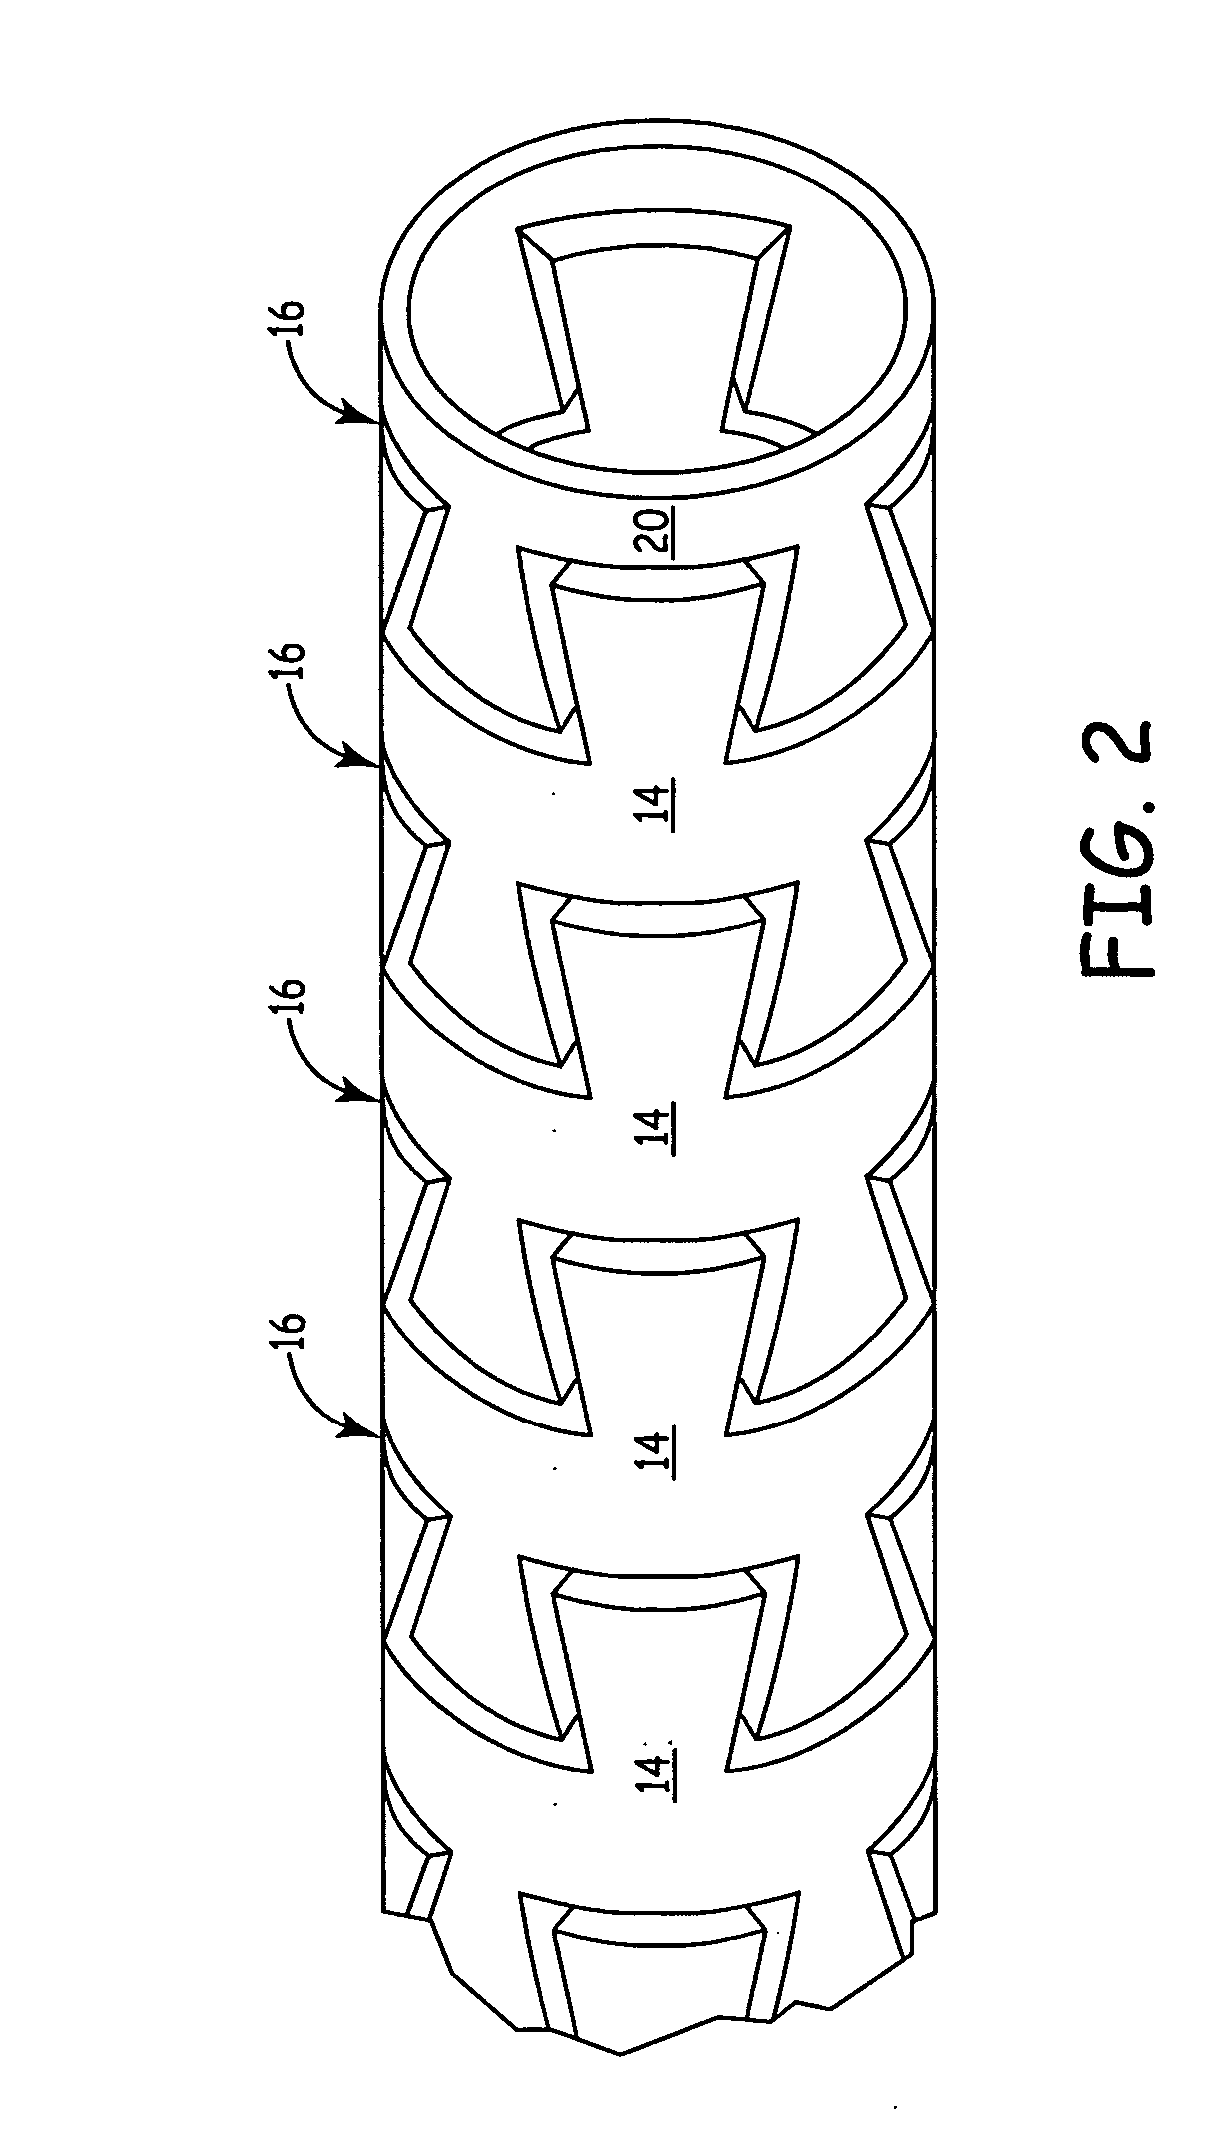 Flexible center connection for occlusion device